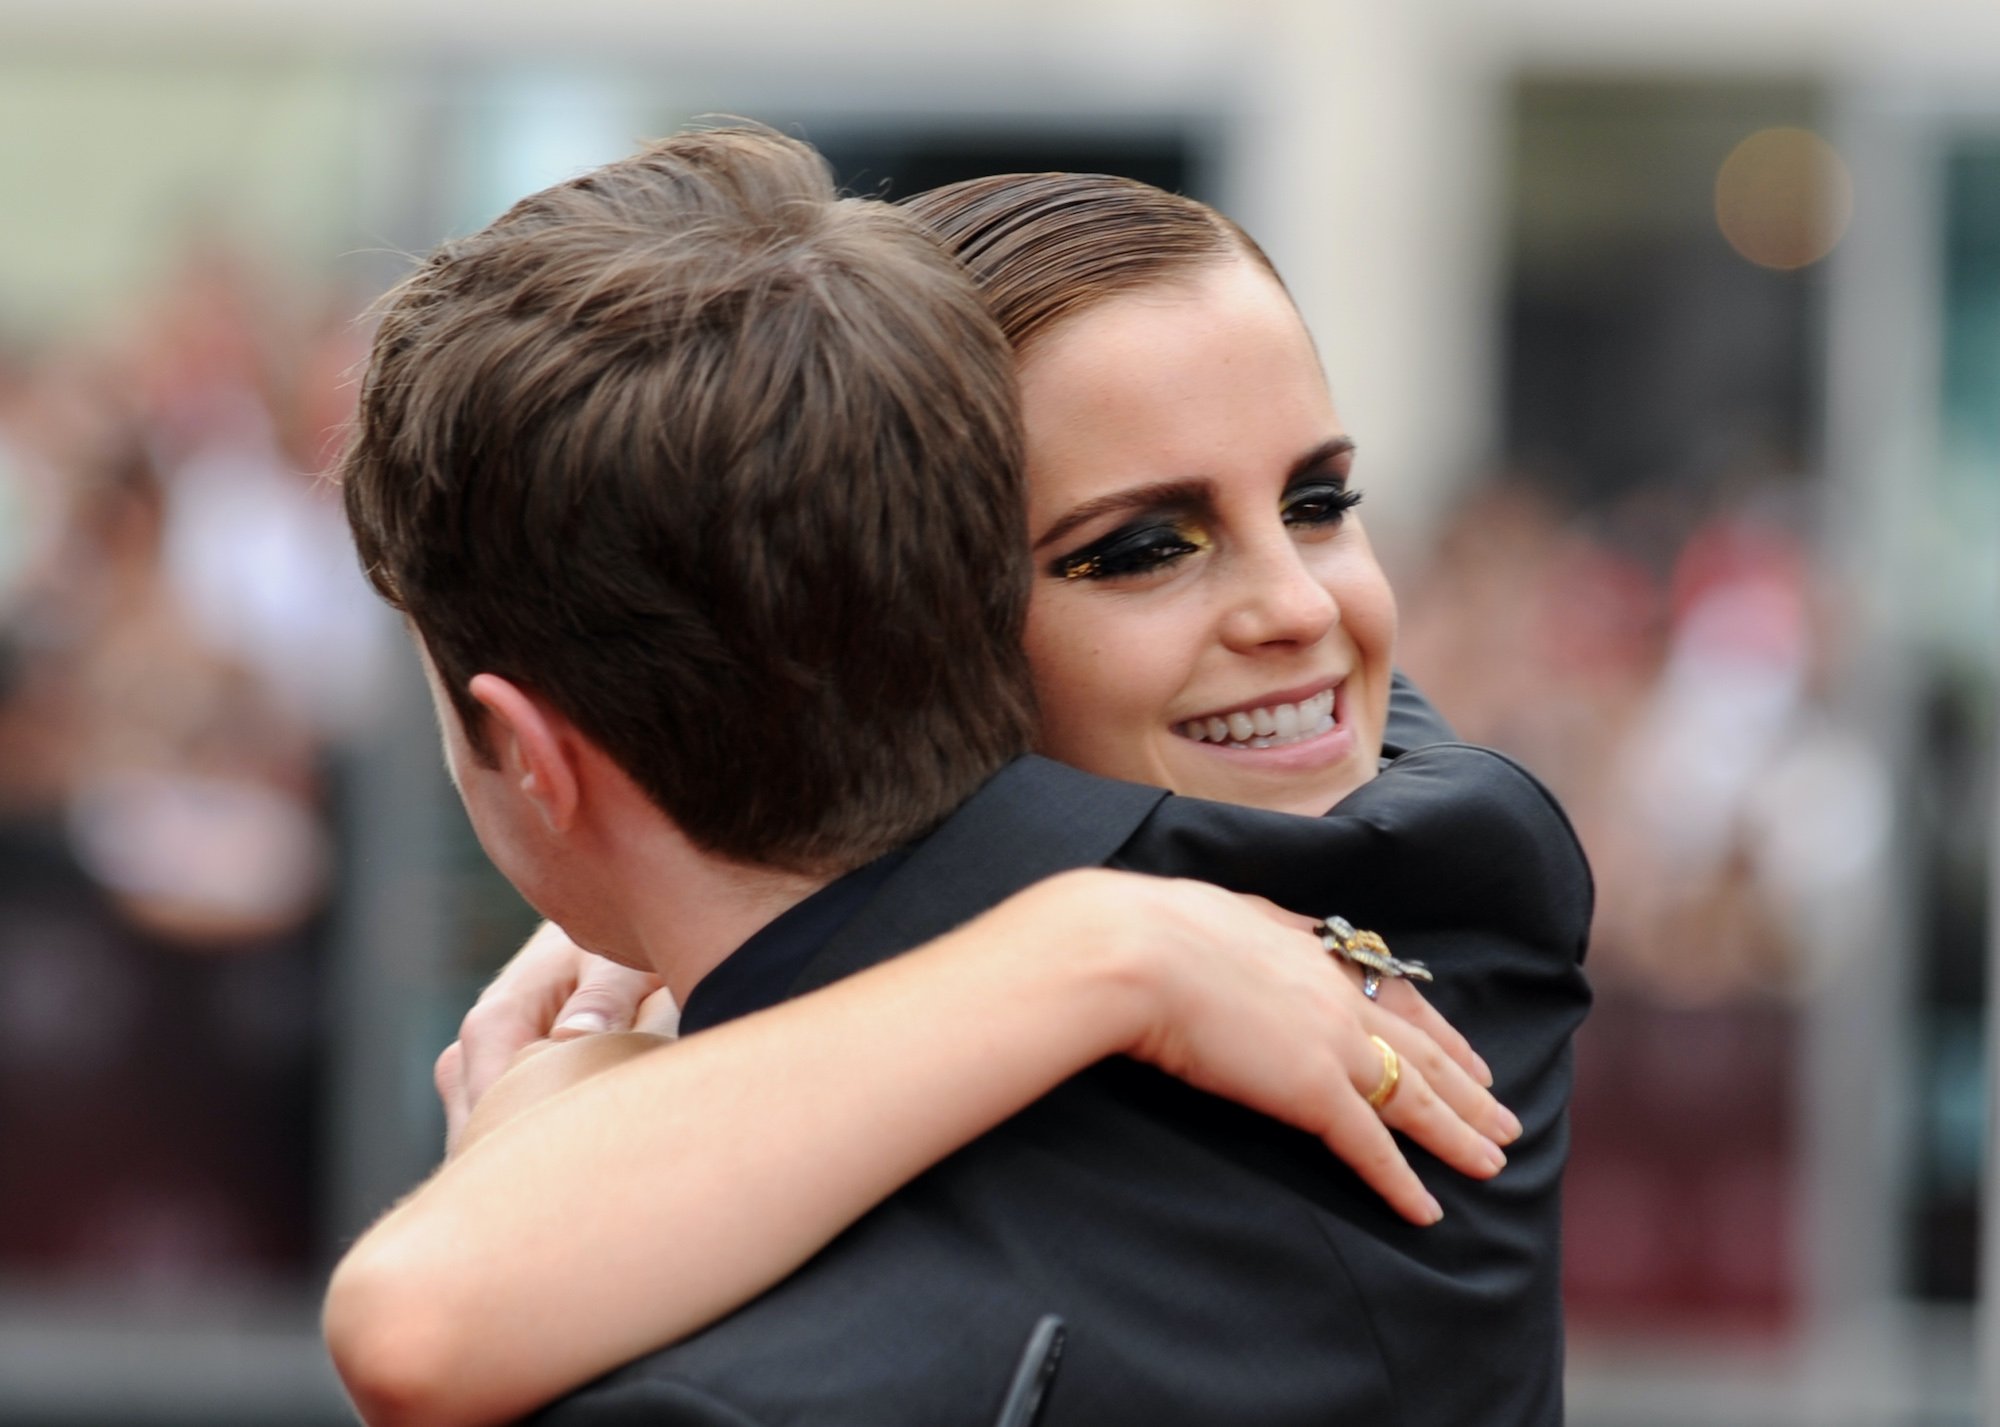 Emma Watson (R), gives a hug to Daniel Radcliffe (L), as they arrive for the North American premiere of Harry Potter and the Deathly Hallows Part 2